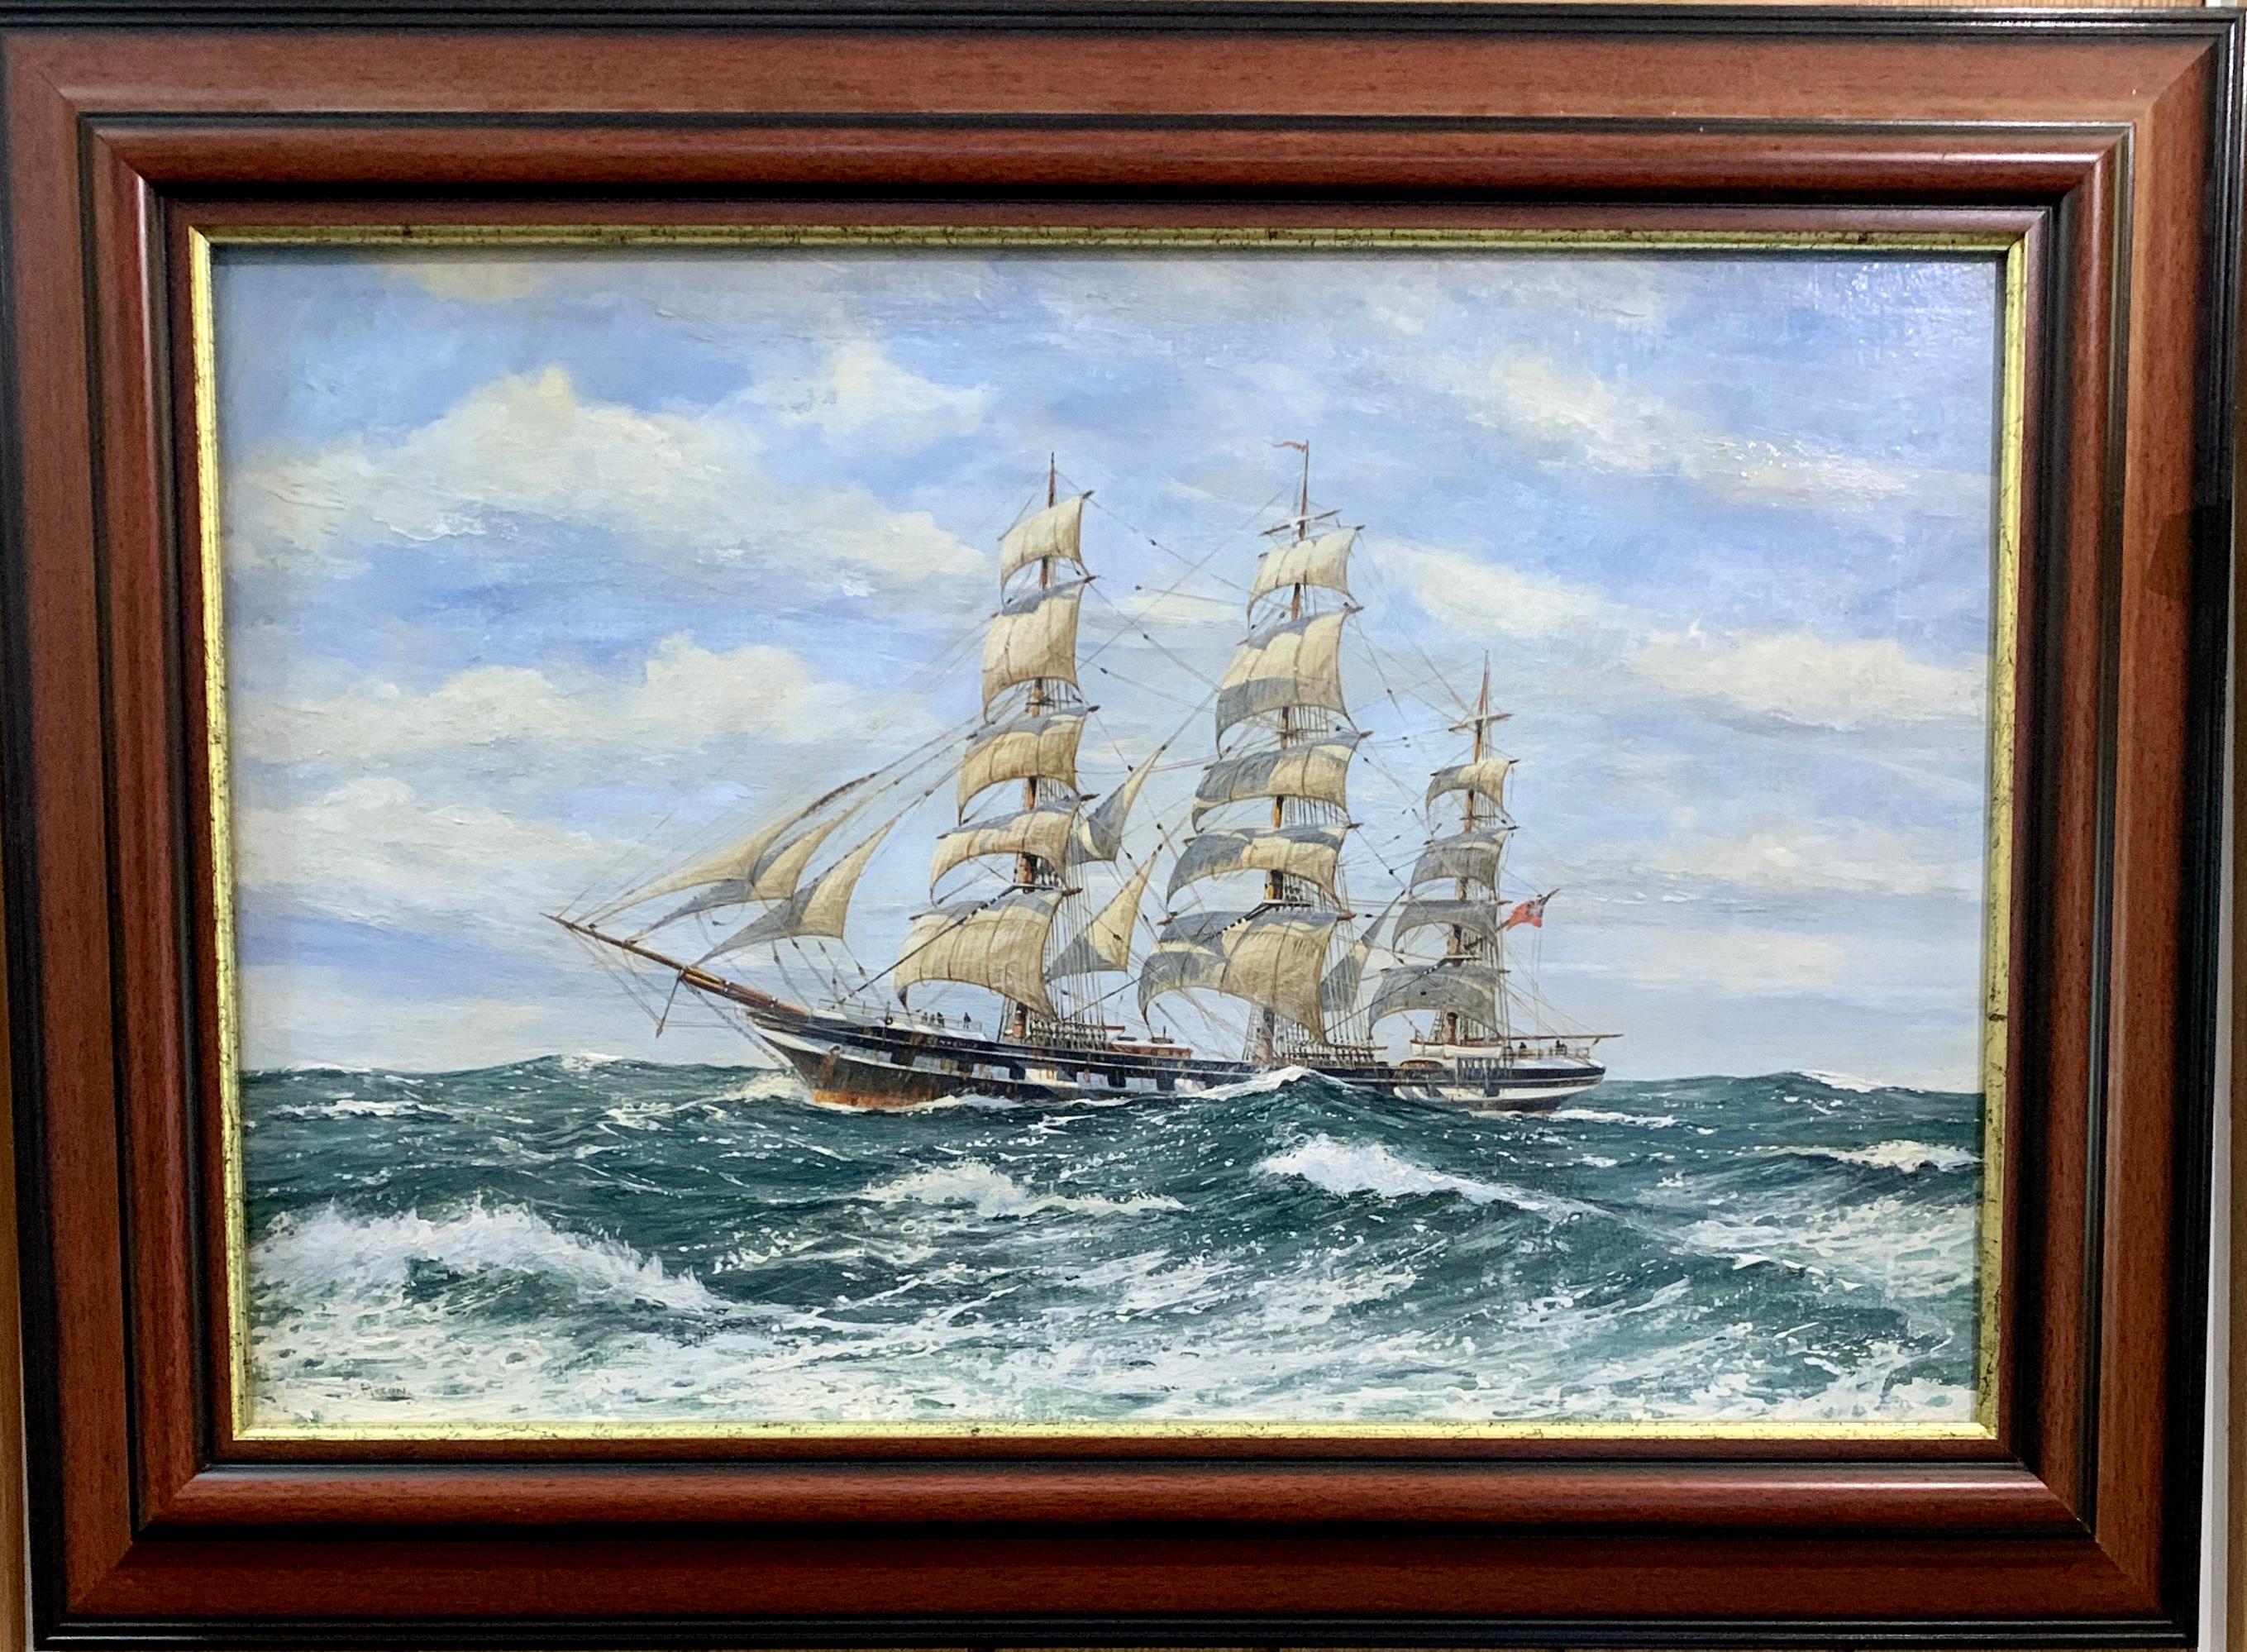 English 20th century portrait of an English Frigate in full sail at sea in oils.